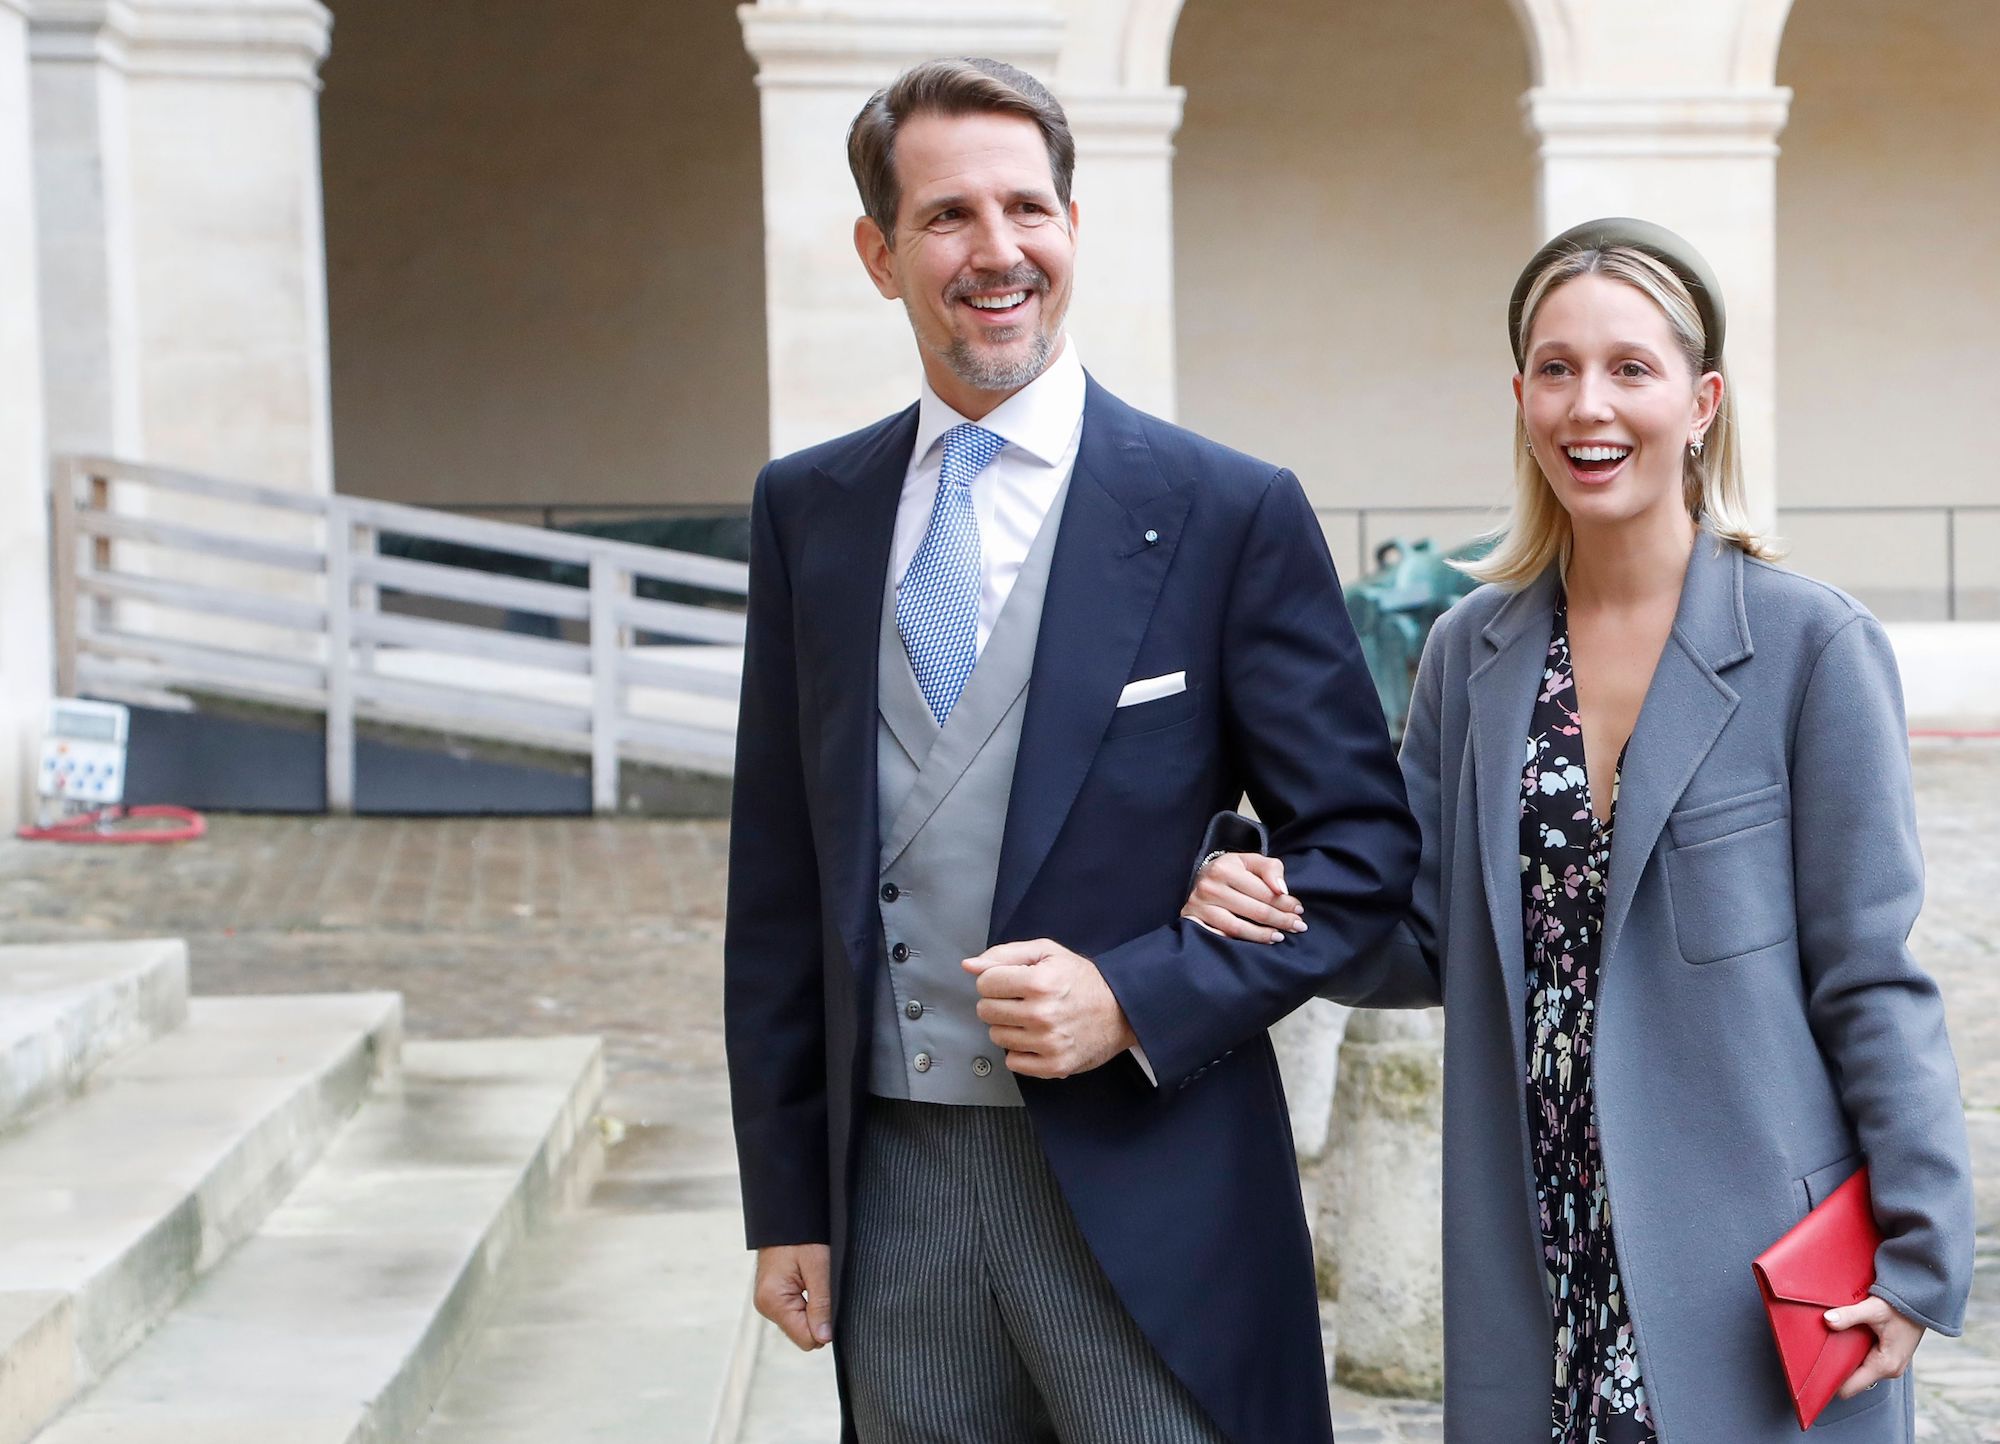 (L-R) Crown Prince Pavlos of Greece and Crown Princess Marie-Chantal smiling, holding hands, standing on a set of steps